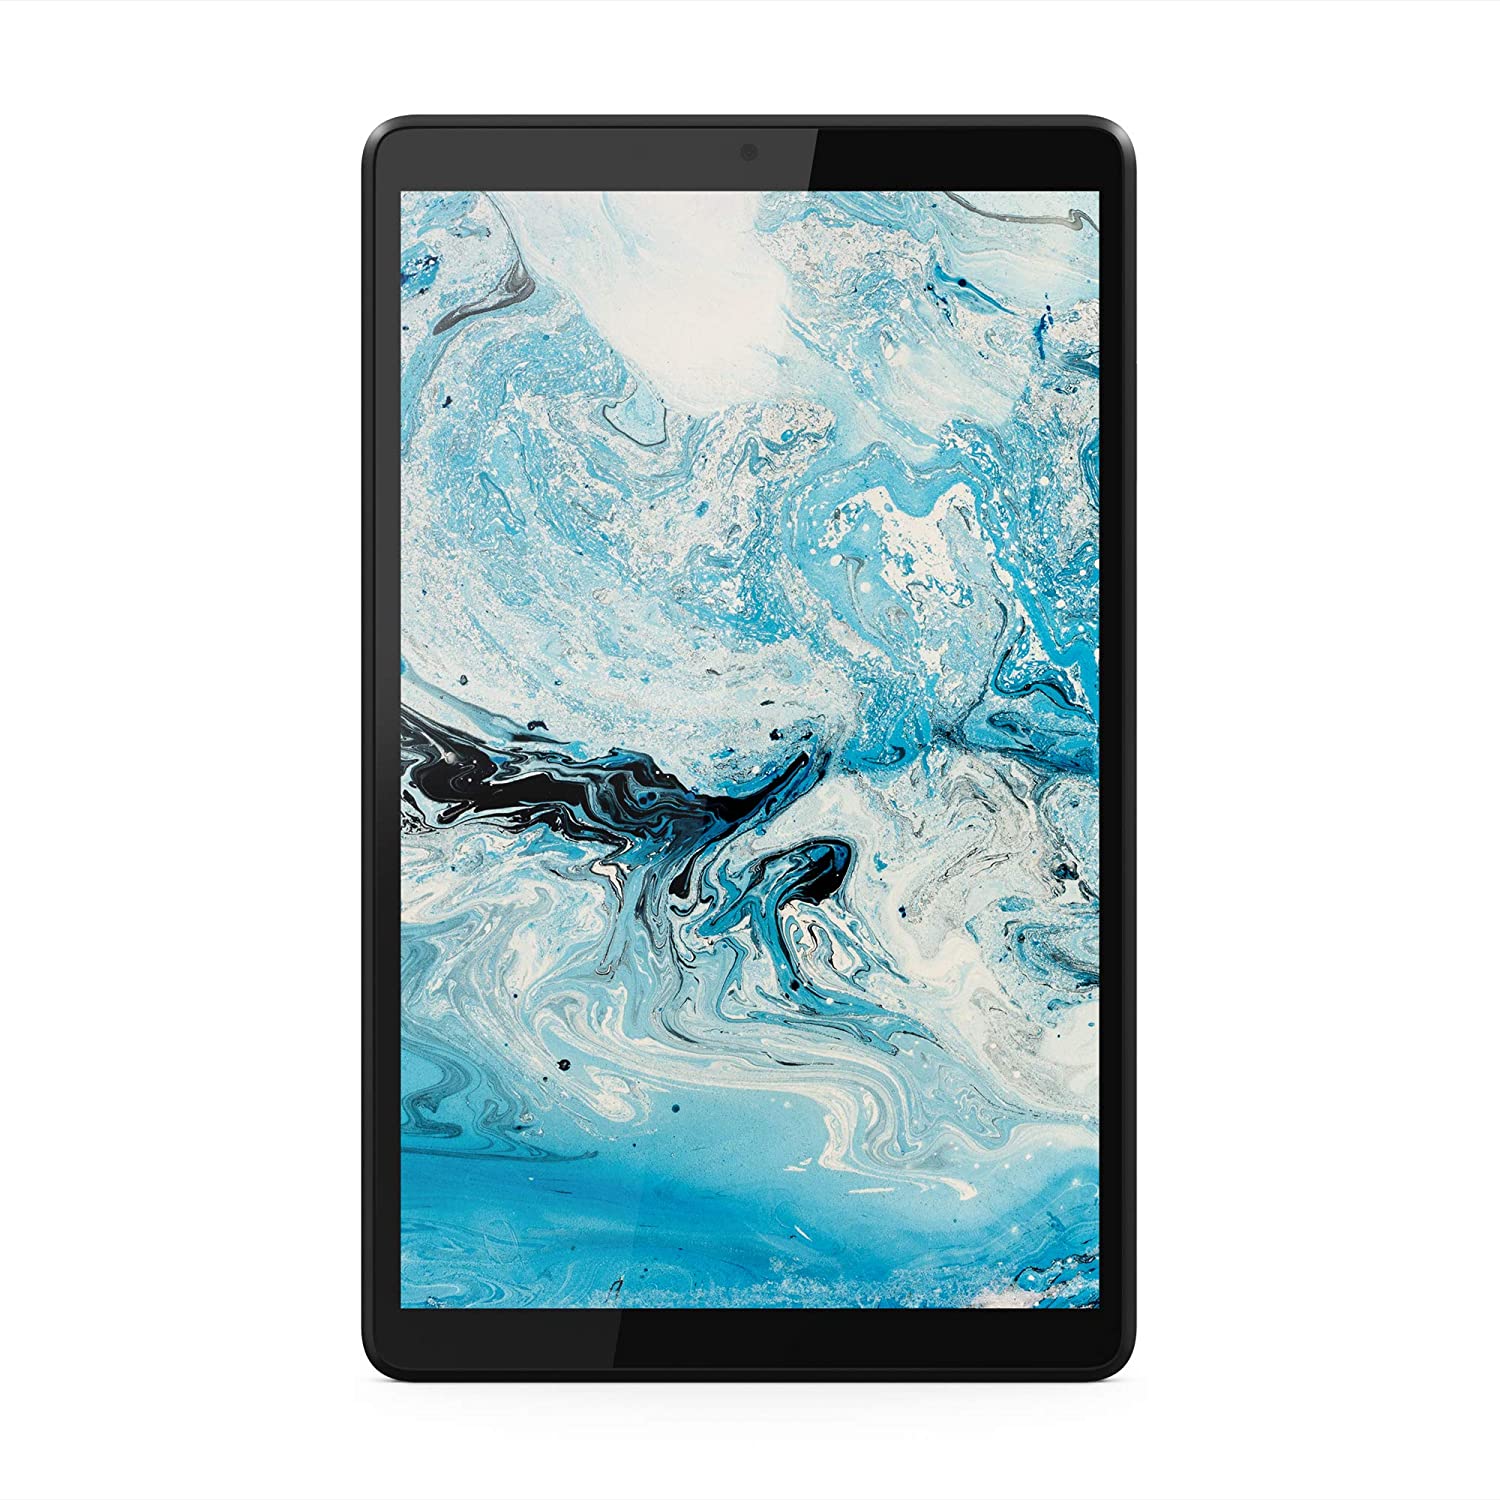 Lenovo Tab M8 Tablet 8 HD Android Tablet Quad Core Processor 2GHz 32GB Storage Full Metal Cover Long Battery Life Android 9 Pie ZA5G0060US Slate Black - DealYaSteal